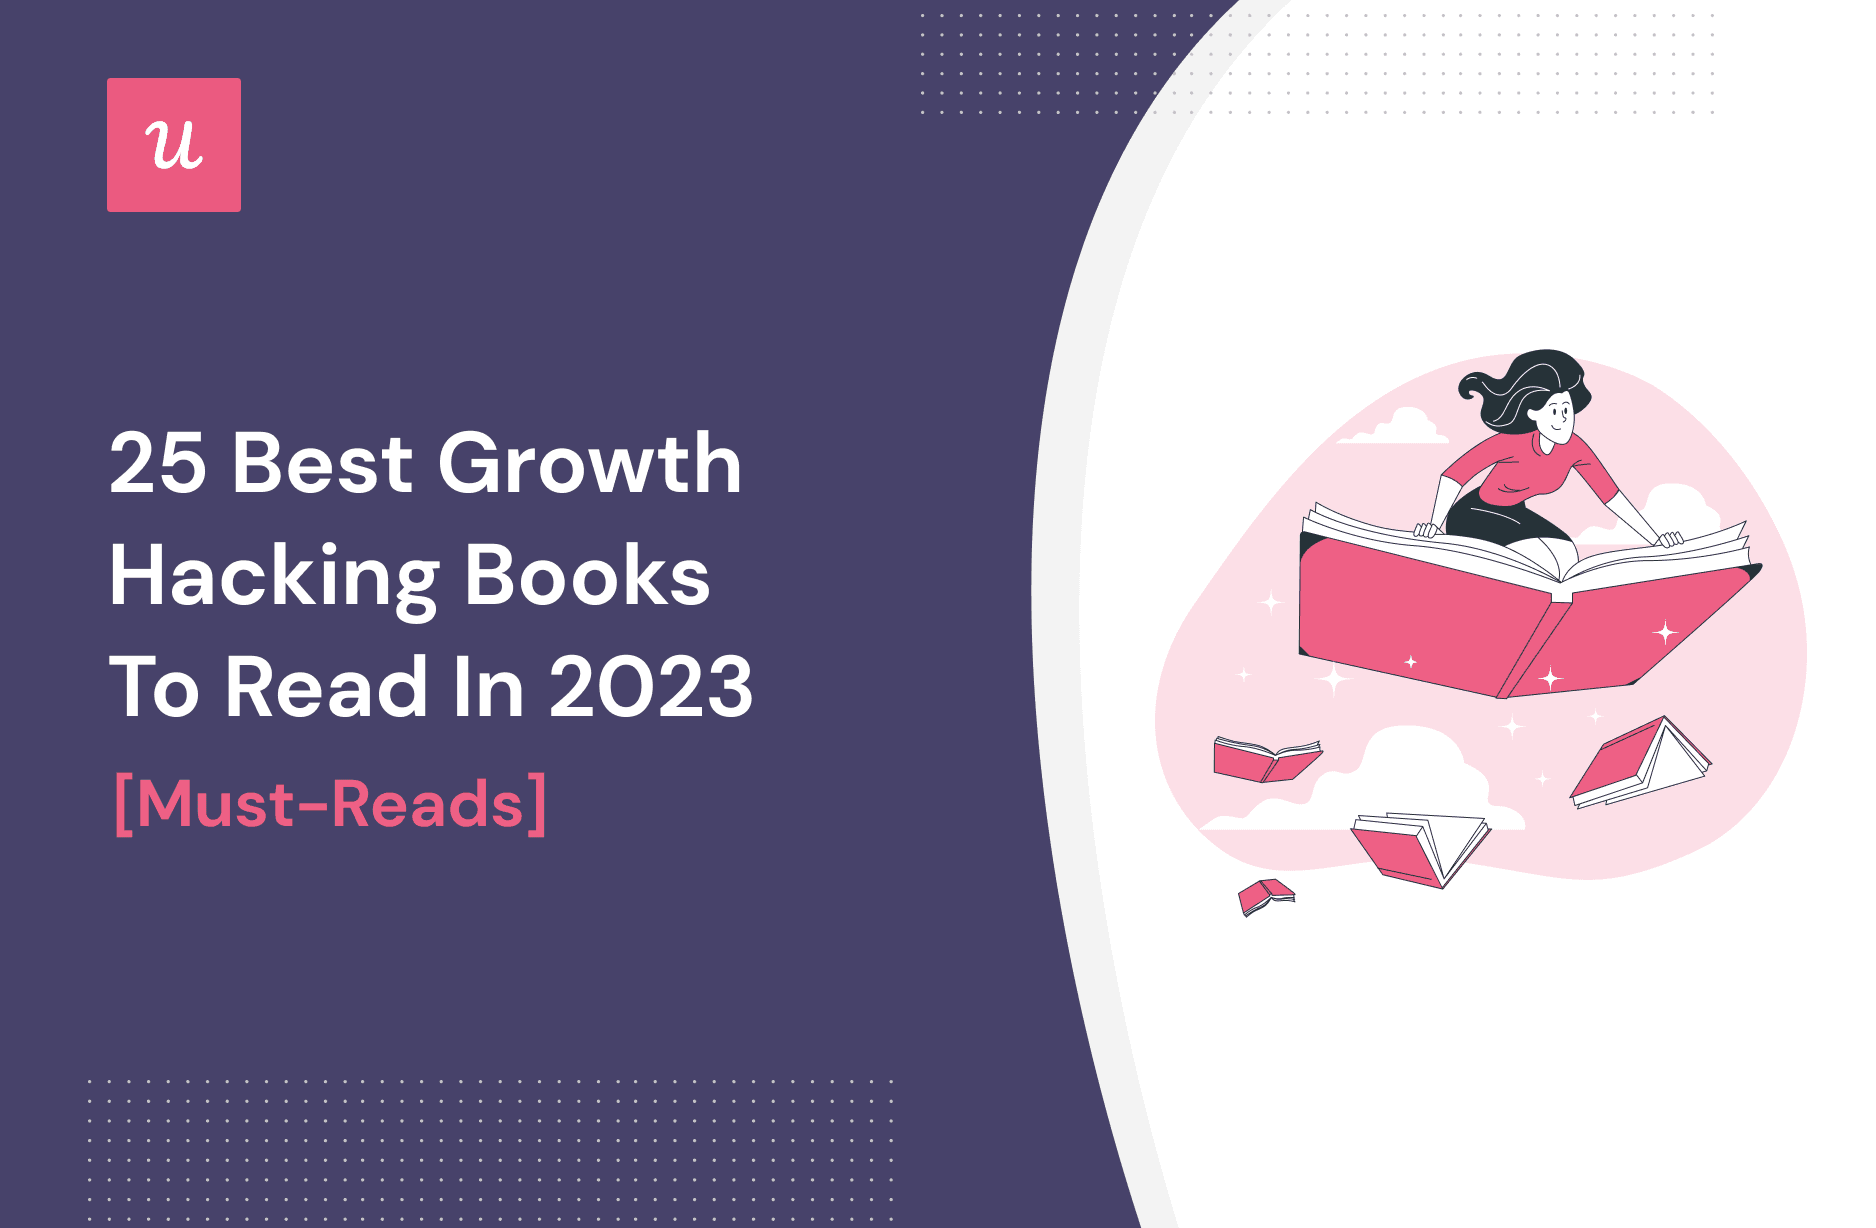 25 Best Growth Hacking Books to Read in 2023 [Must-Reads] cover